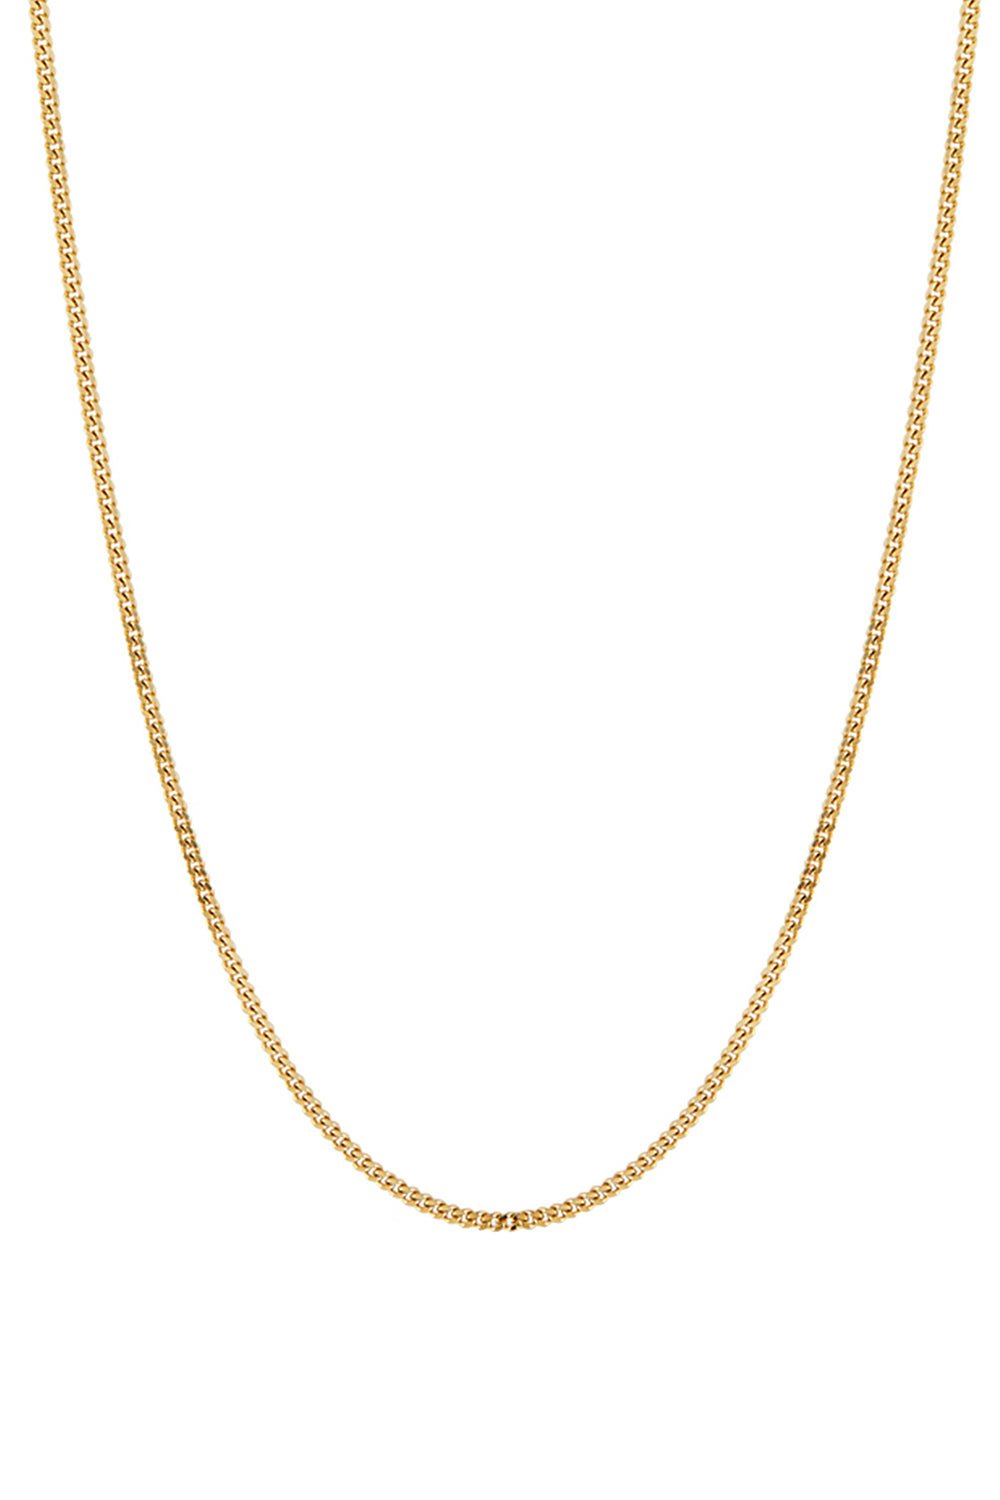 JADE TRAU-Curb Chain Number 50-YELLOW GOLD